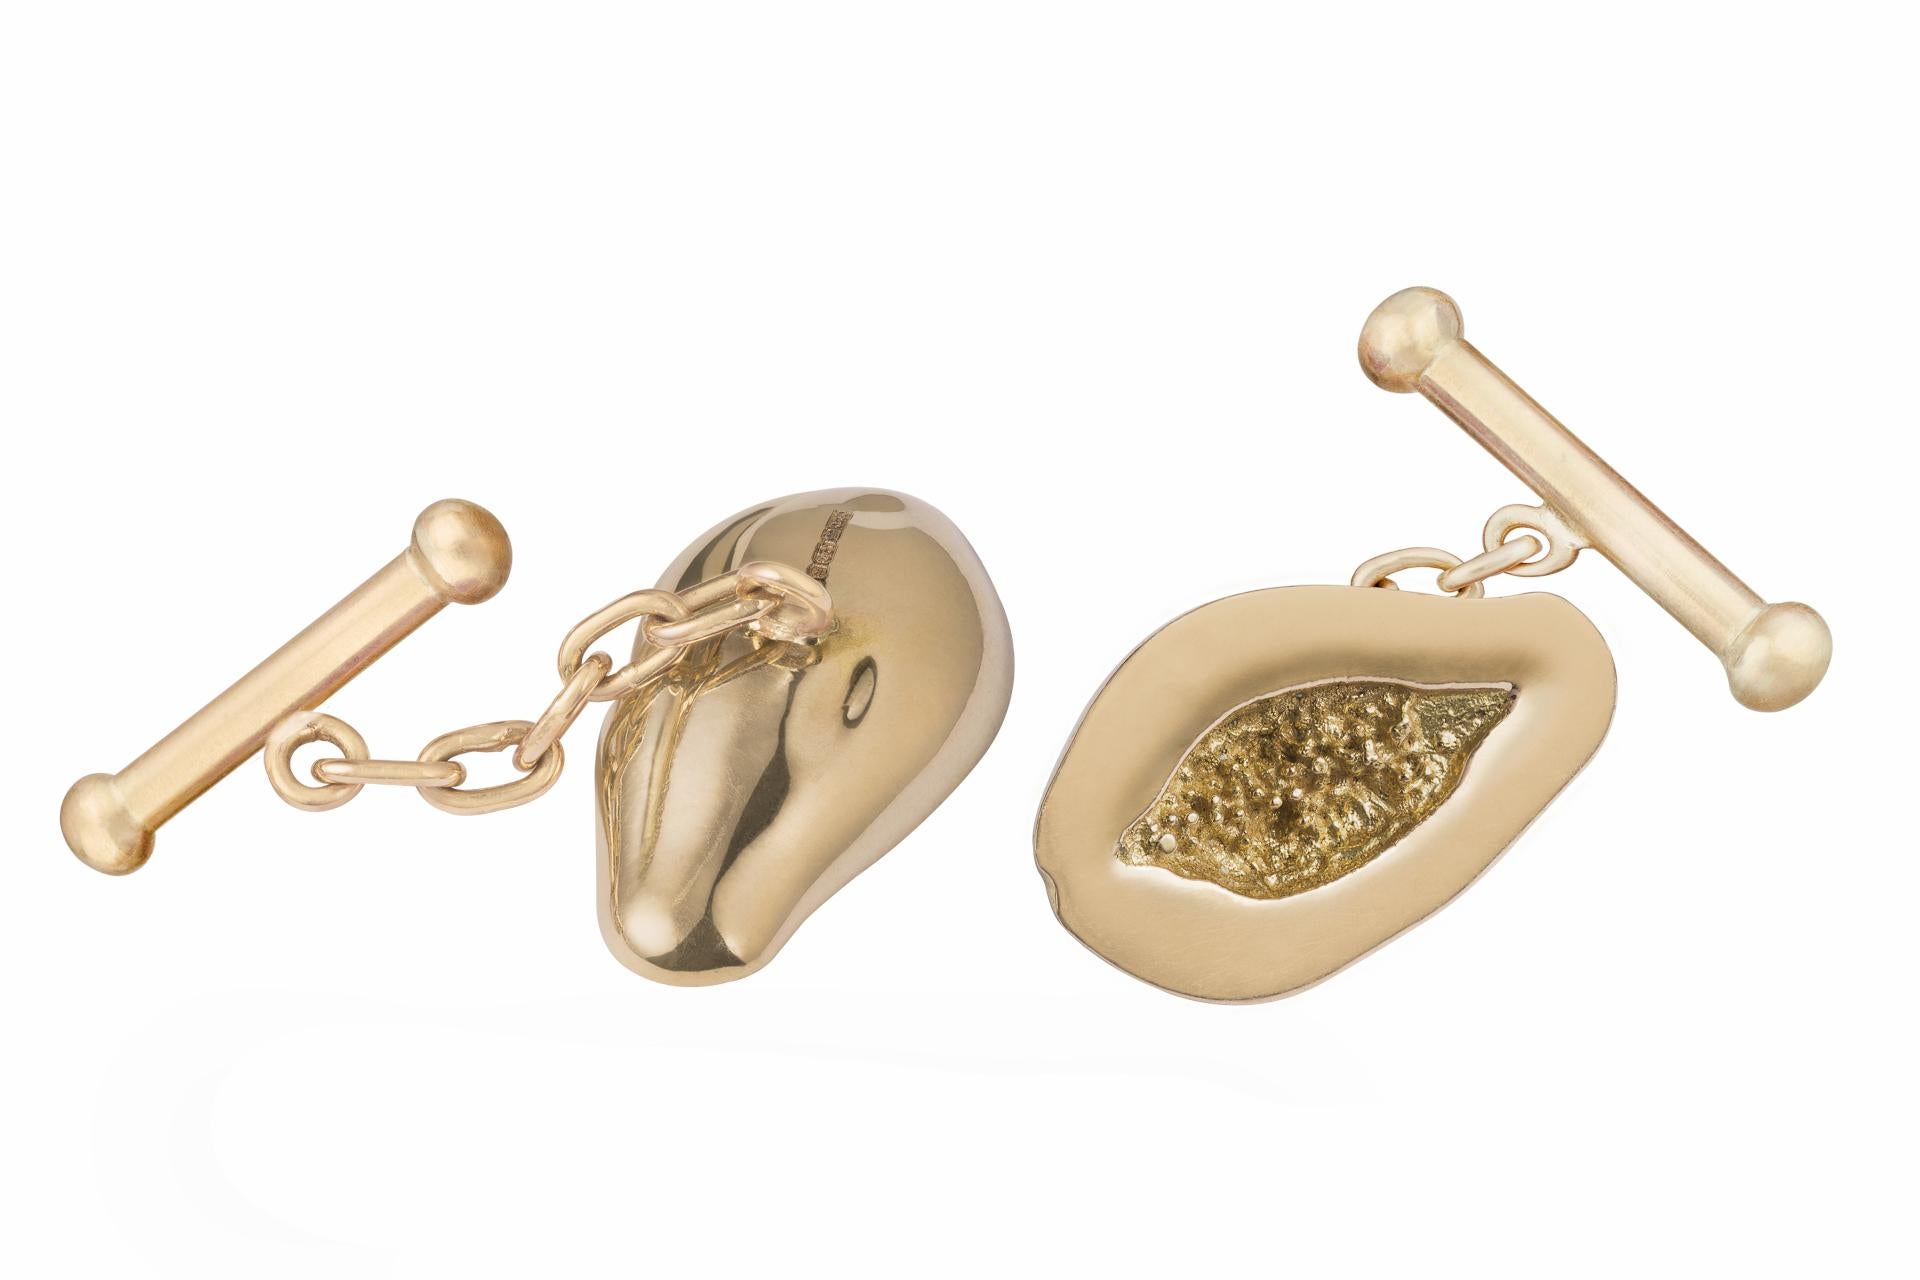 OUROBOROS beautifully hand carved solid 18kt gold Papaya cufflinks.

OUROBOROS’ commitment to using only the most unique stones set in 18 or 24 Karat gold, is matched only to Olivia’s commitment to the conditions and treatment of her talented